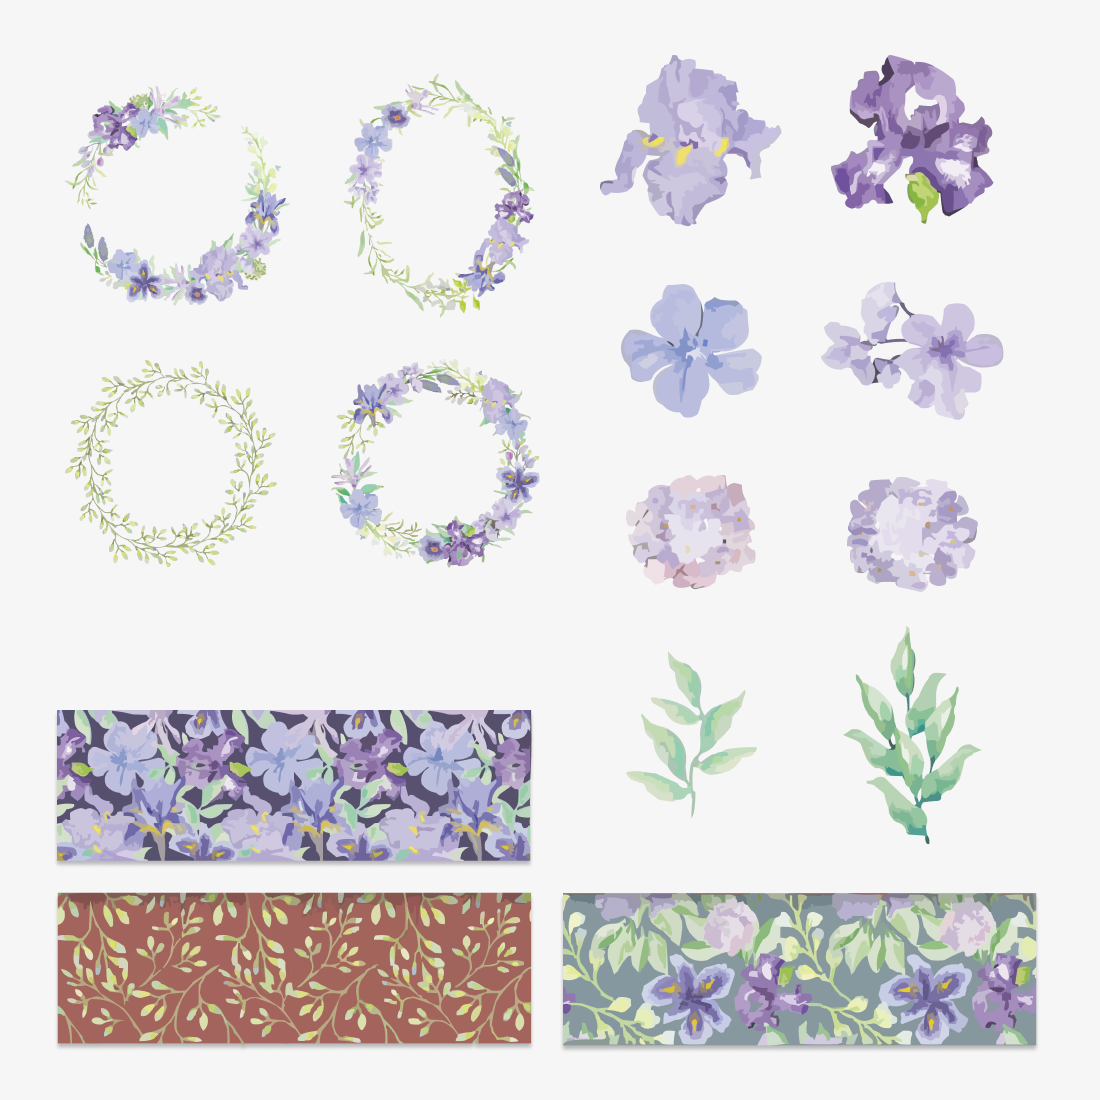 The iris collection set svg cover.